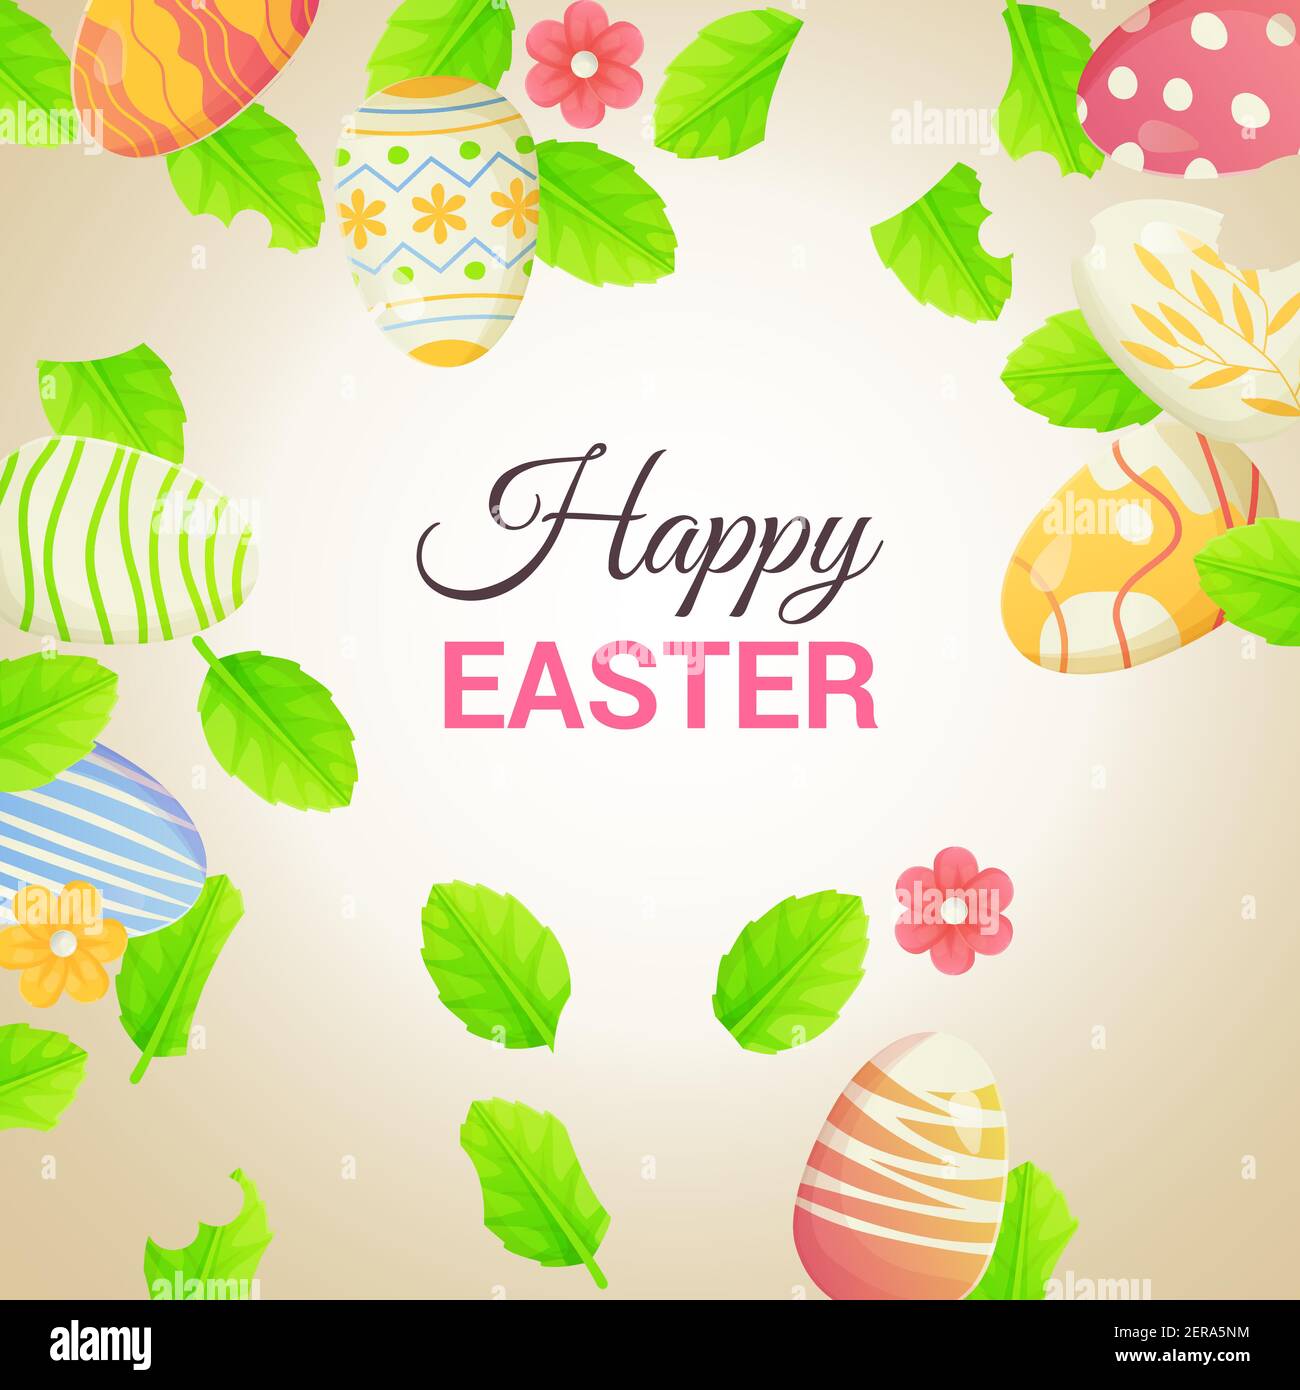 Happy Easter frame with eggs and flower, leaves. Can be used as poster, holiday card, decorative frame. Stock vector illustration in cartoon realistic Stock Vector